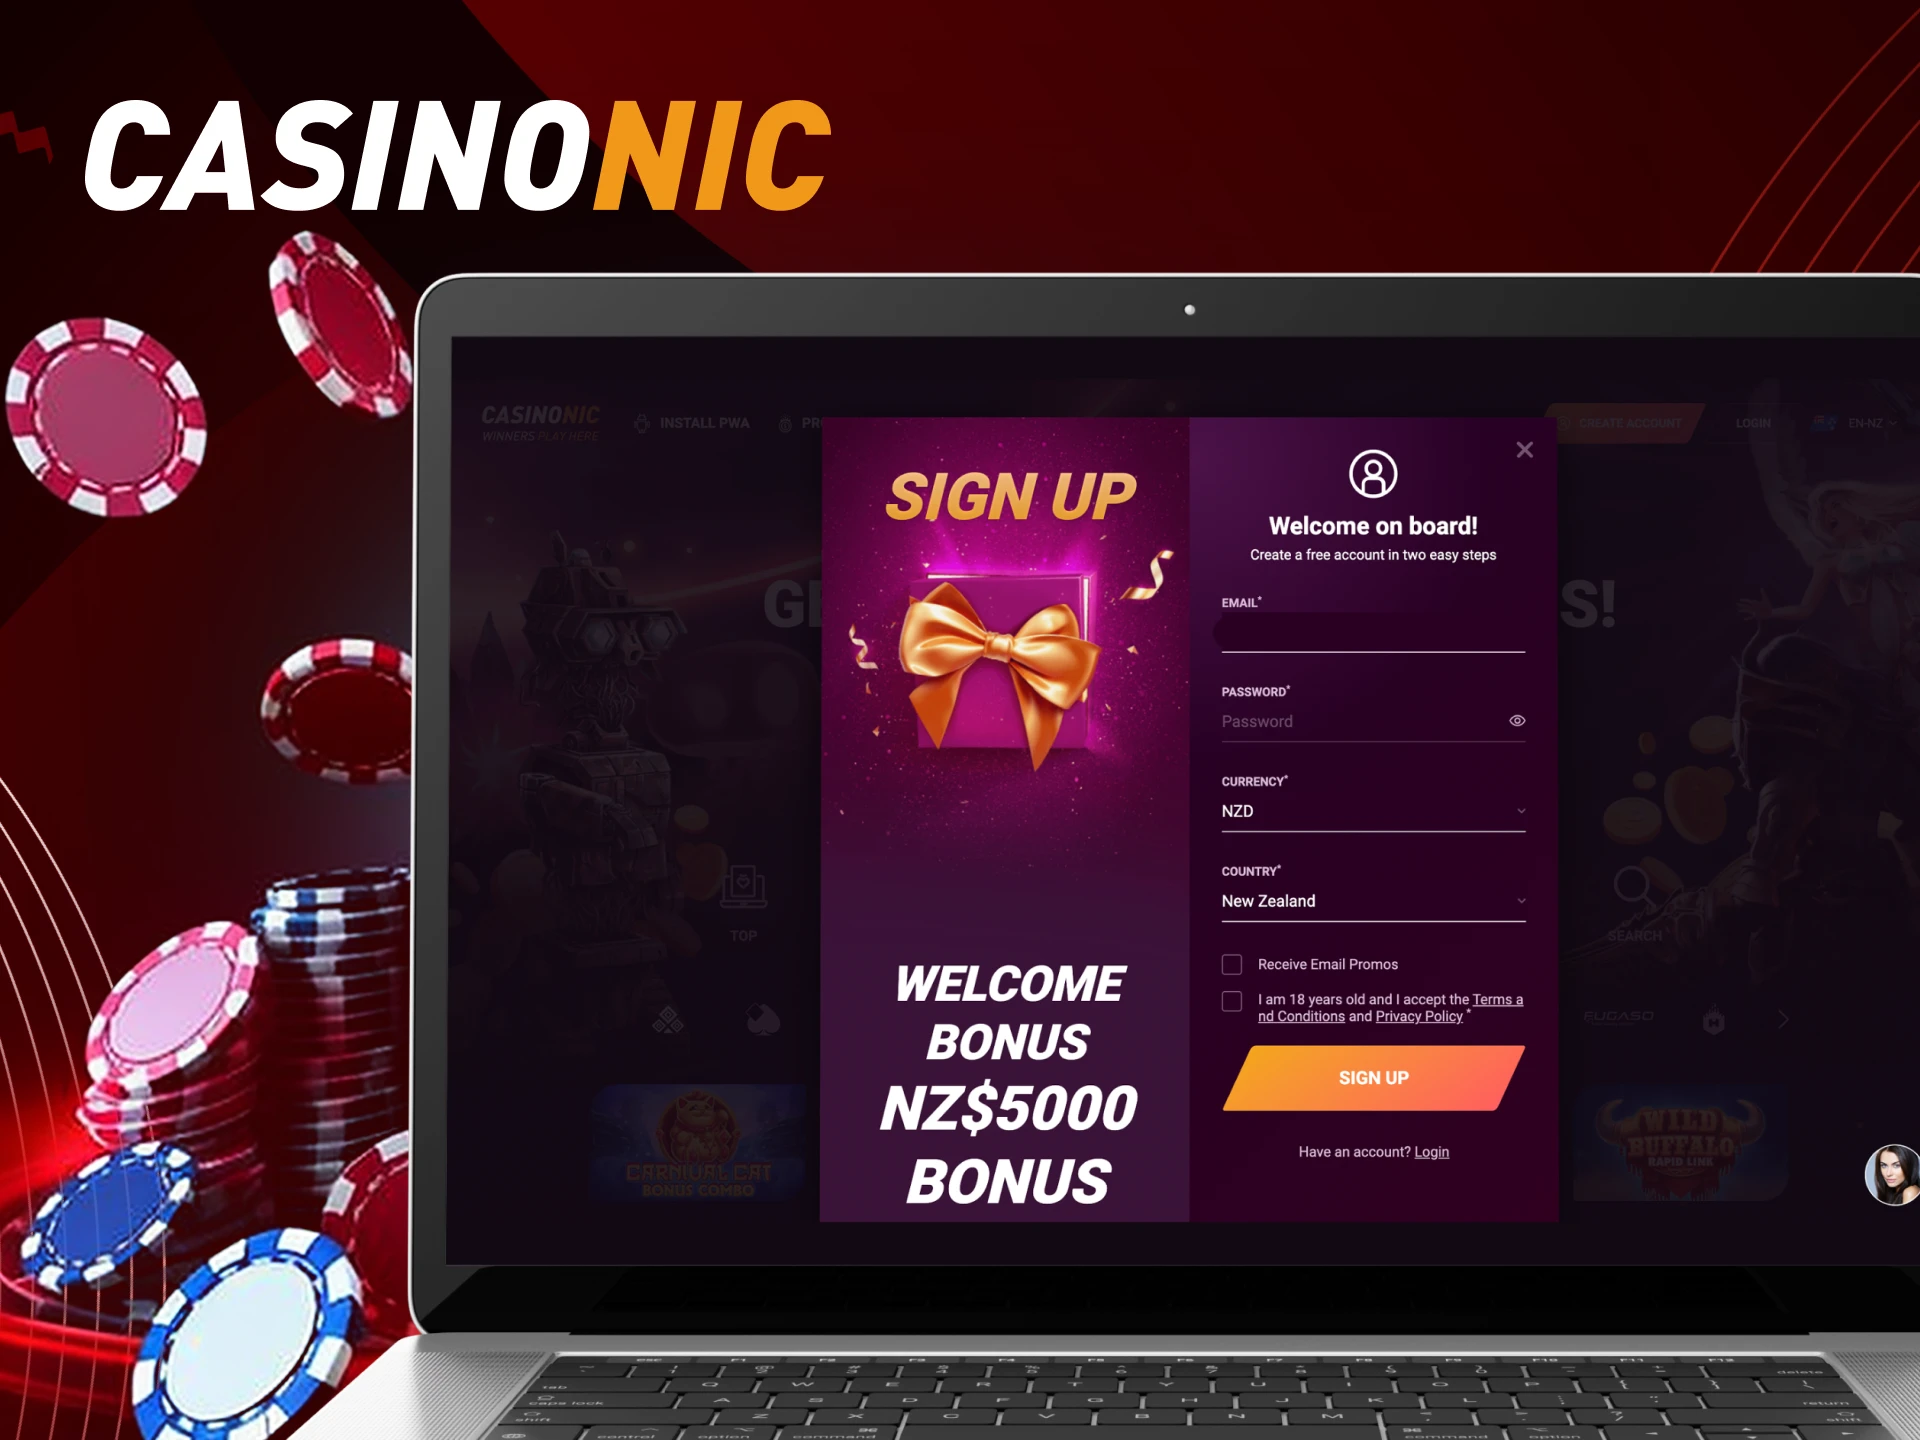 Step-by-step instructions for registering users in the online casino CasinoNic.